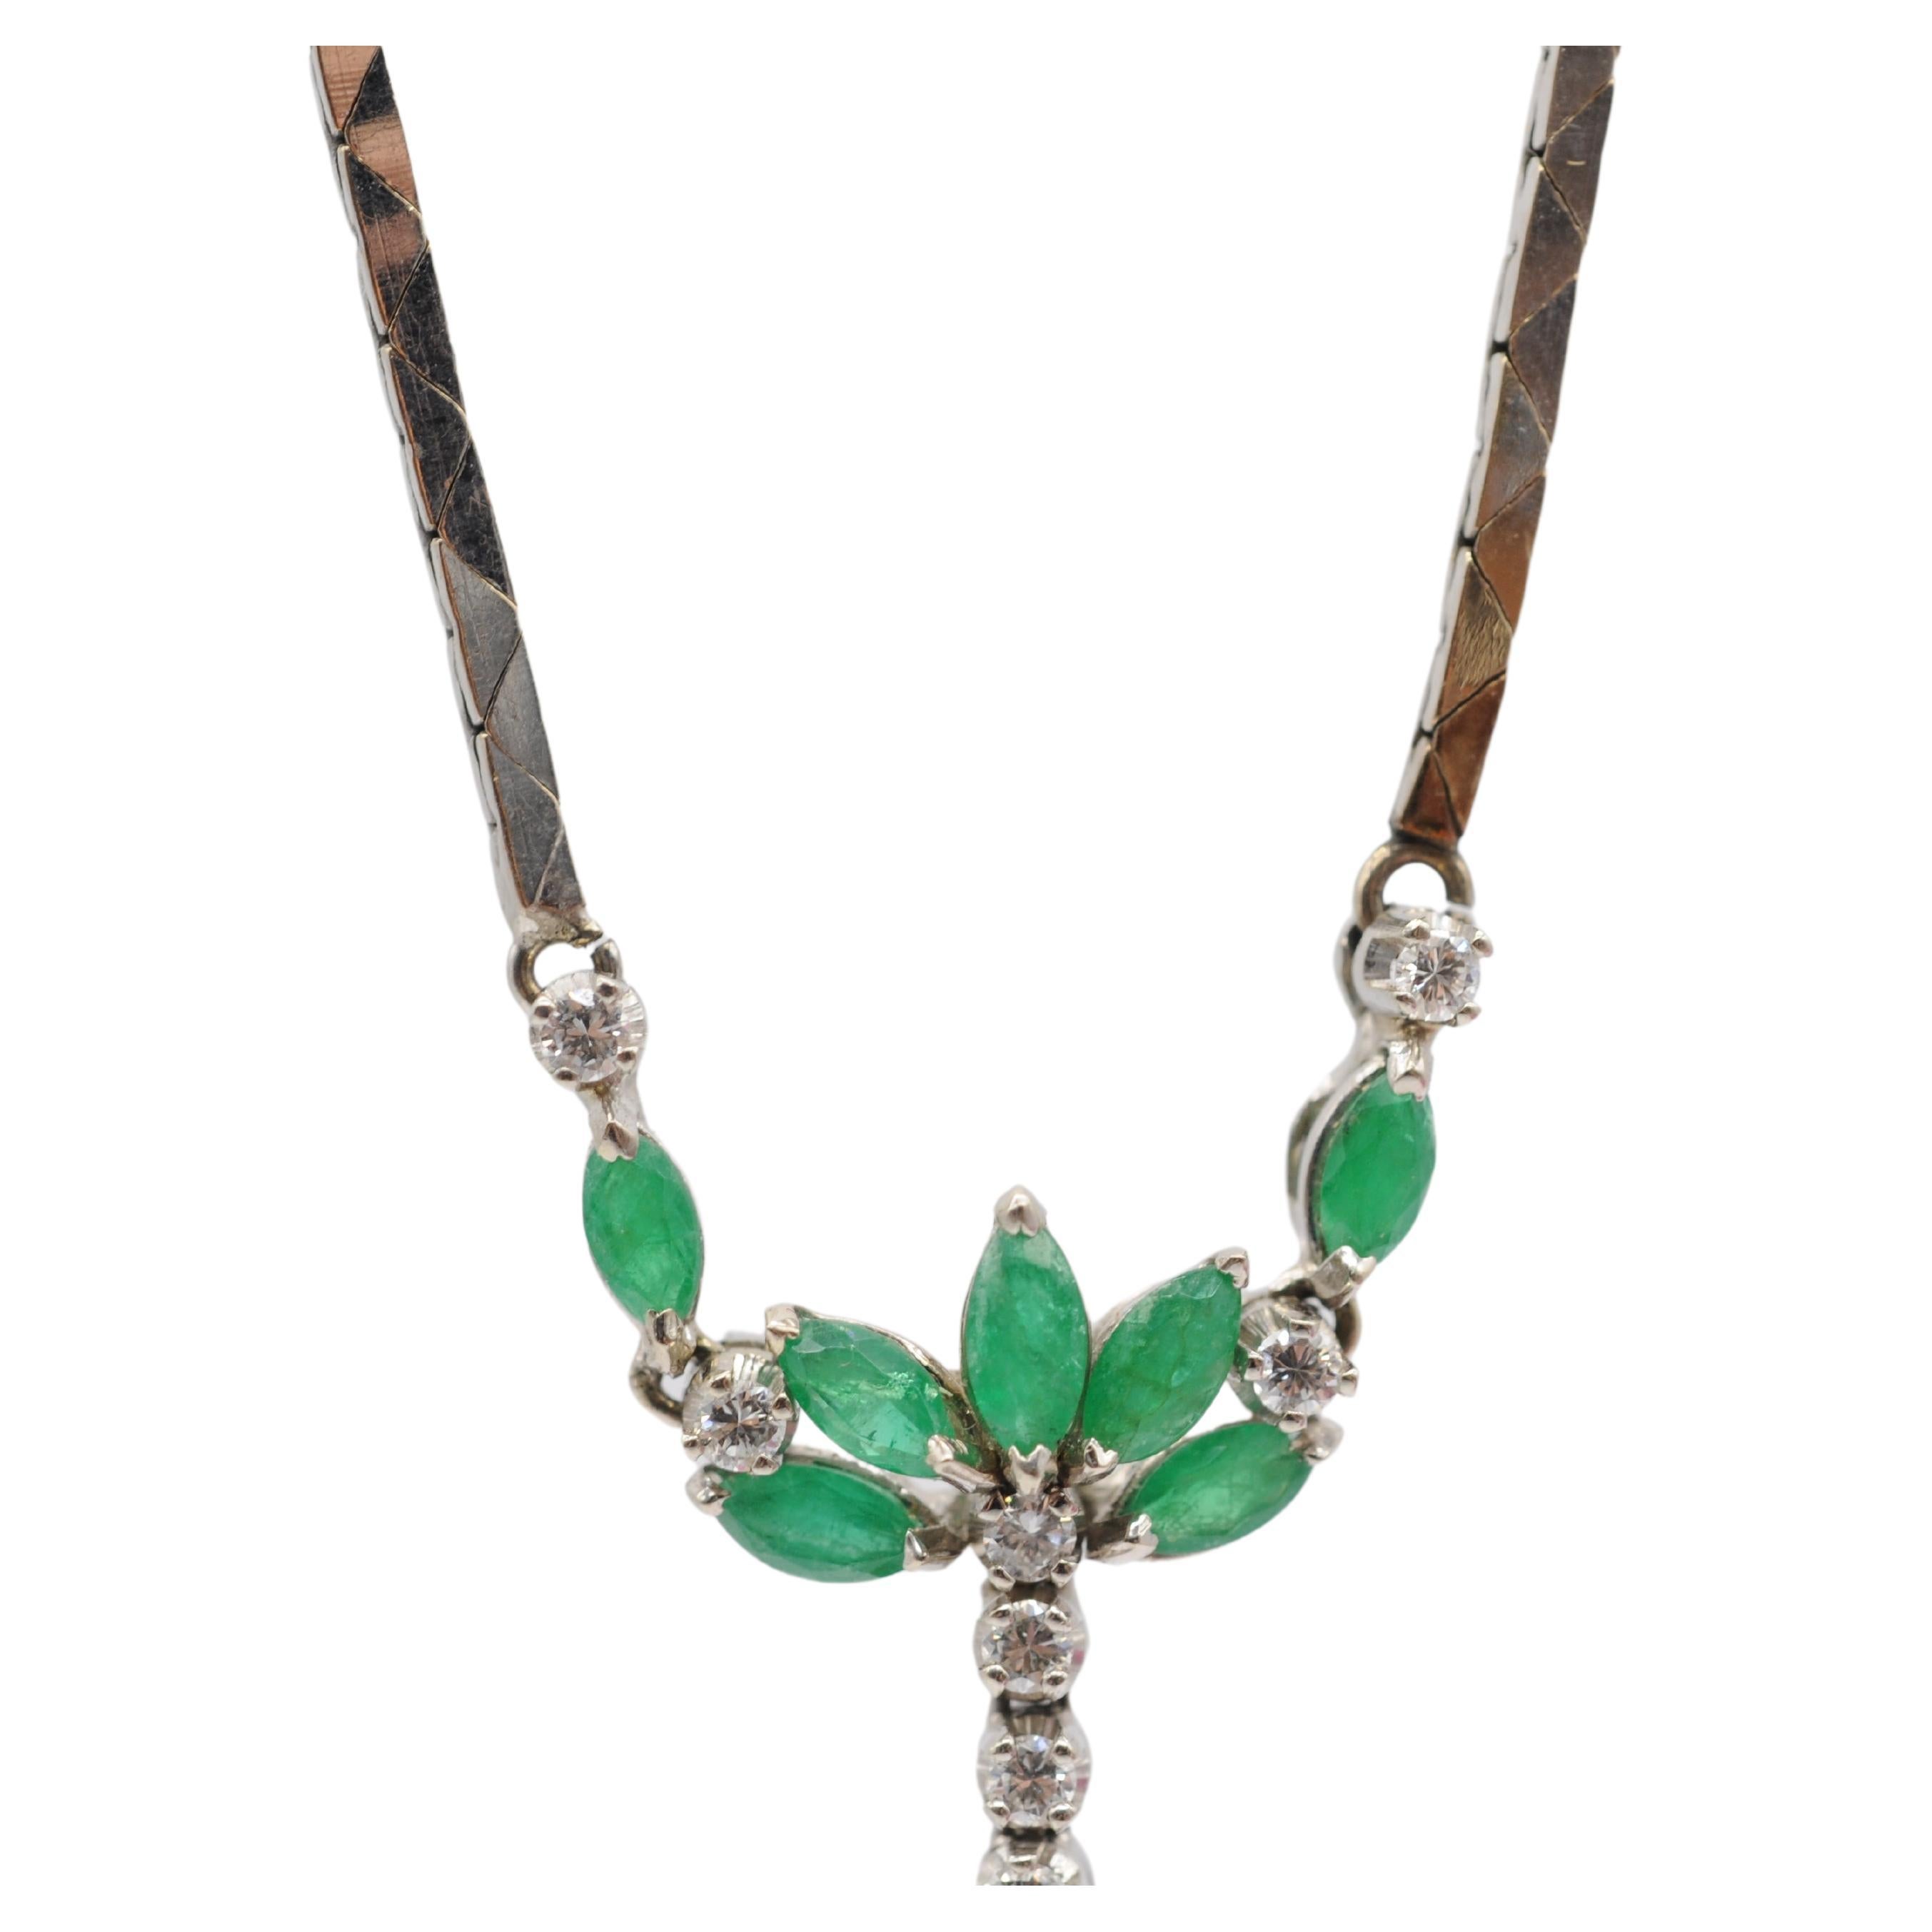 Wonderful Art deco style dreamfull necklace with emeralds and diamonds For Sale 1